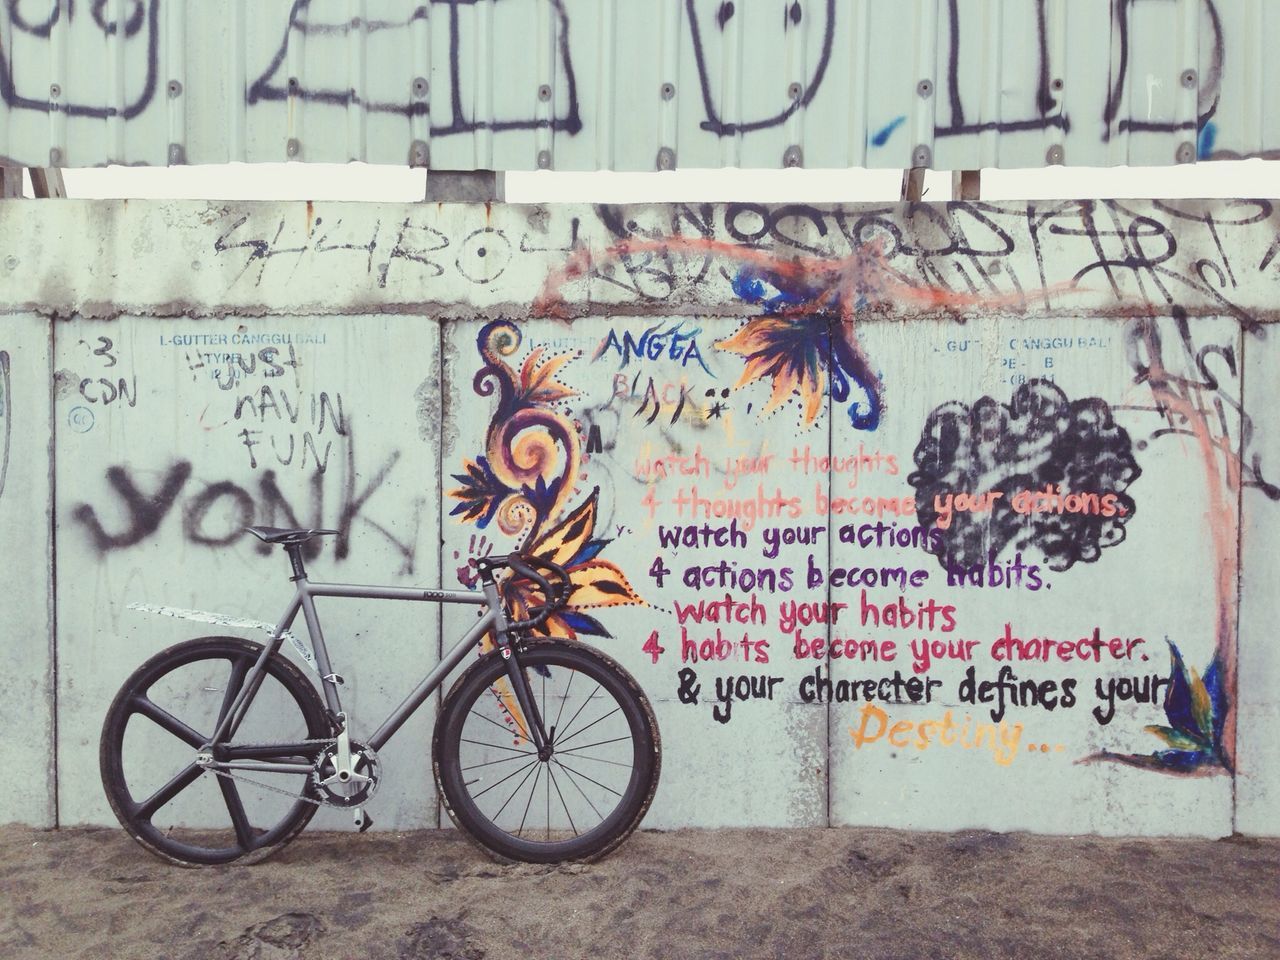 text, graffiti, bicycle, western script, wall - building feature, communication, art and craft, art, creativity, wall, street art, capital letter, built structure, day, architecture, transportation, no people, outdoors, non-western script, parking